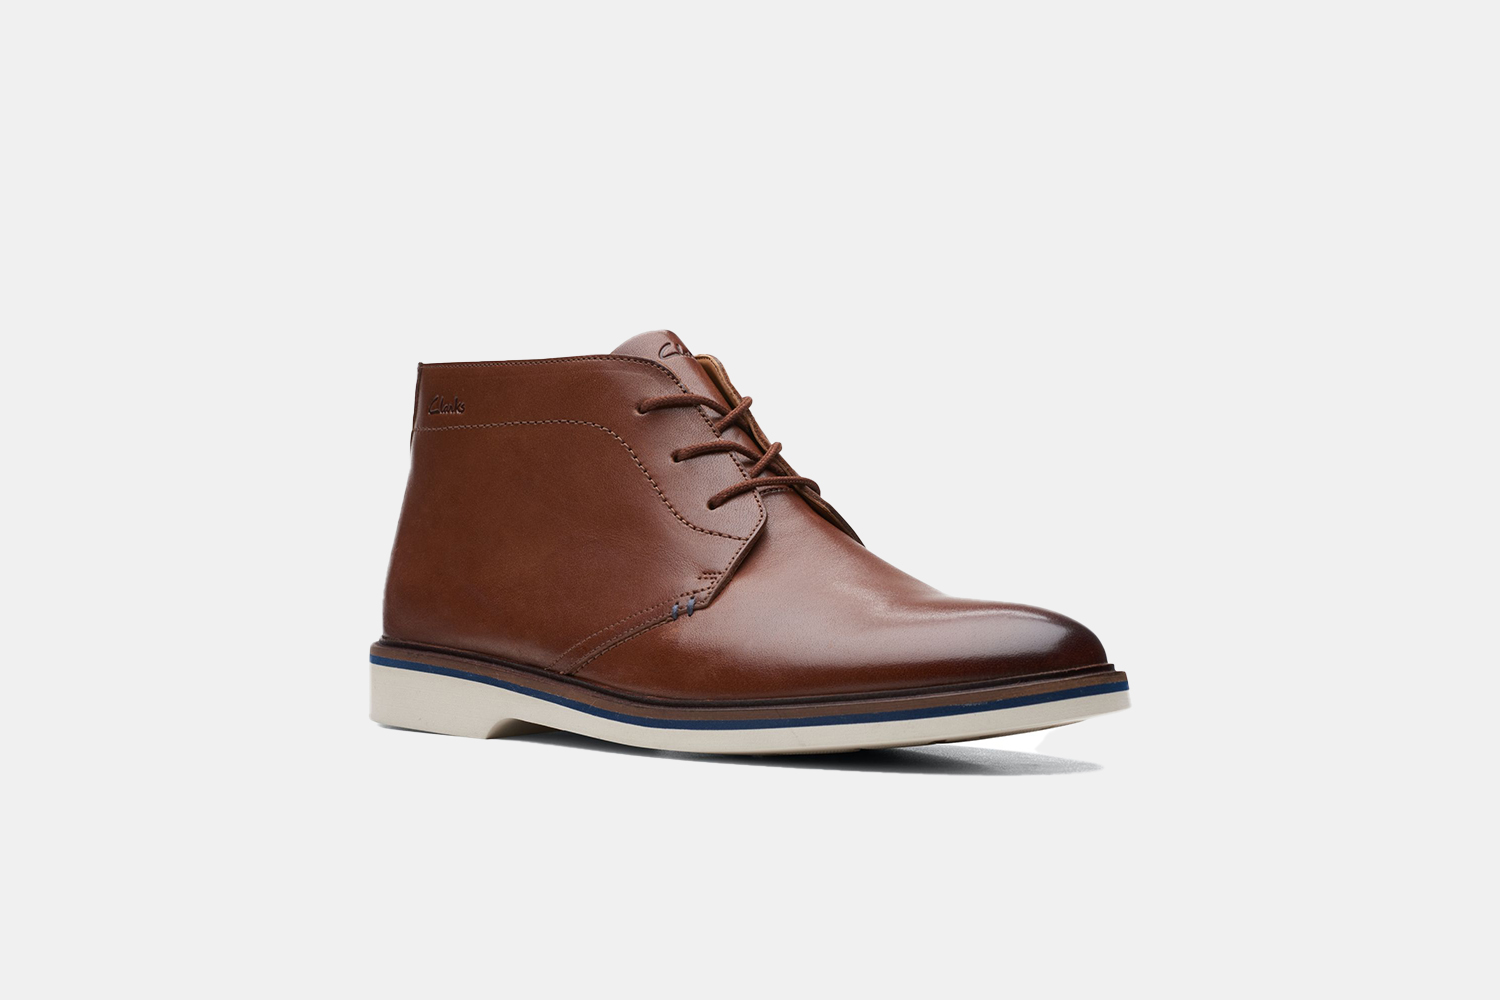 a brown leather boot